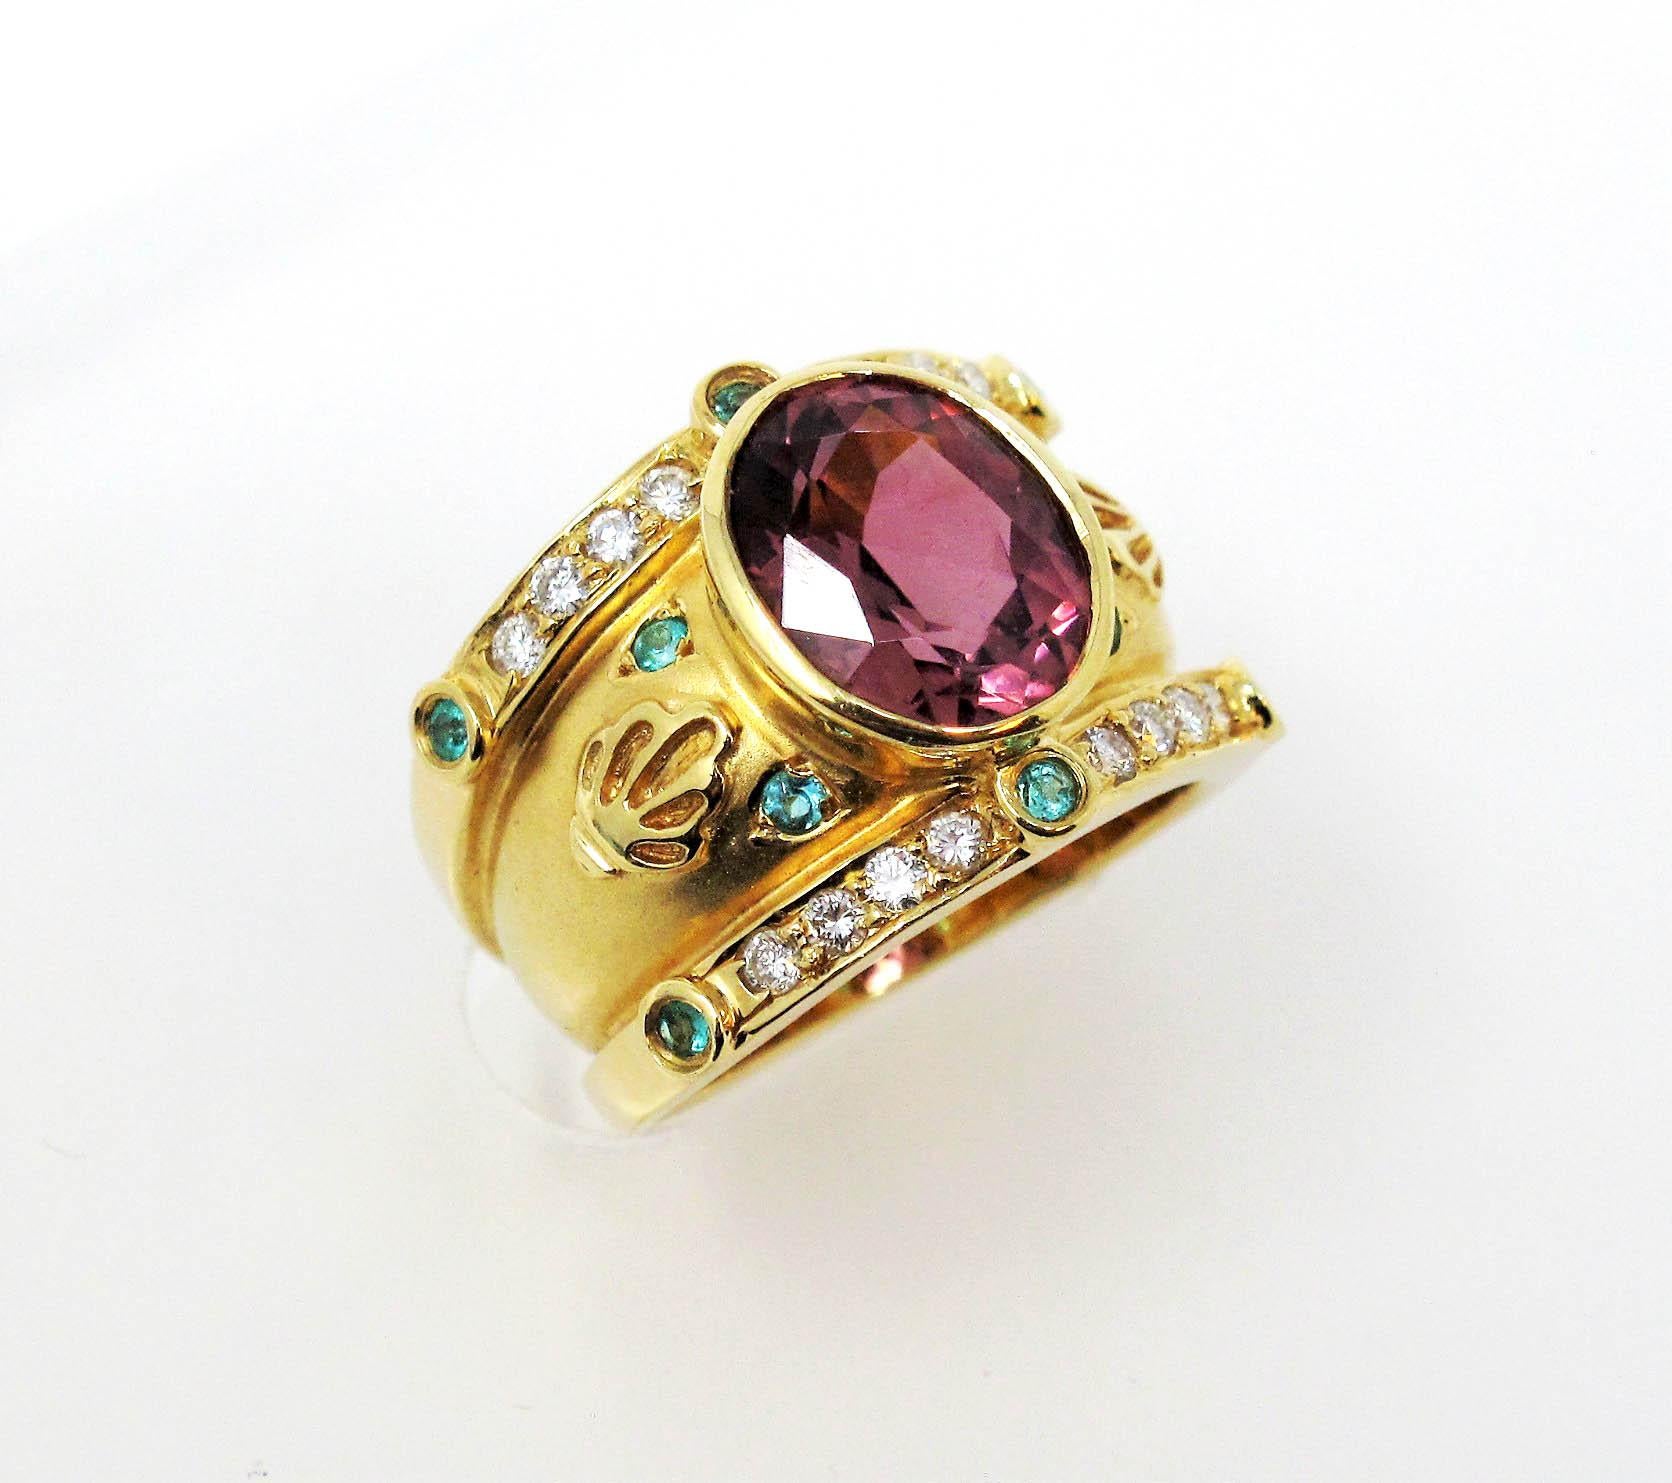 Etruscan Revival Judy Mayfield Etruscan Style 18K Gold Cigar Band Ring Pink and Green Tourmaline 